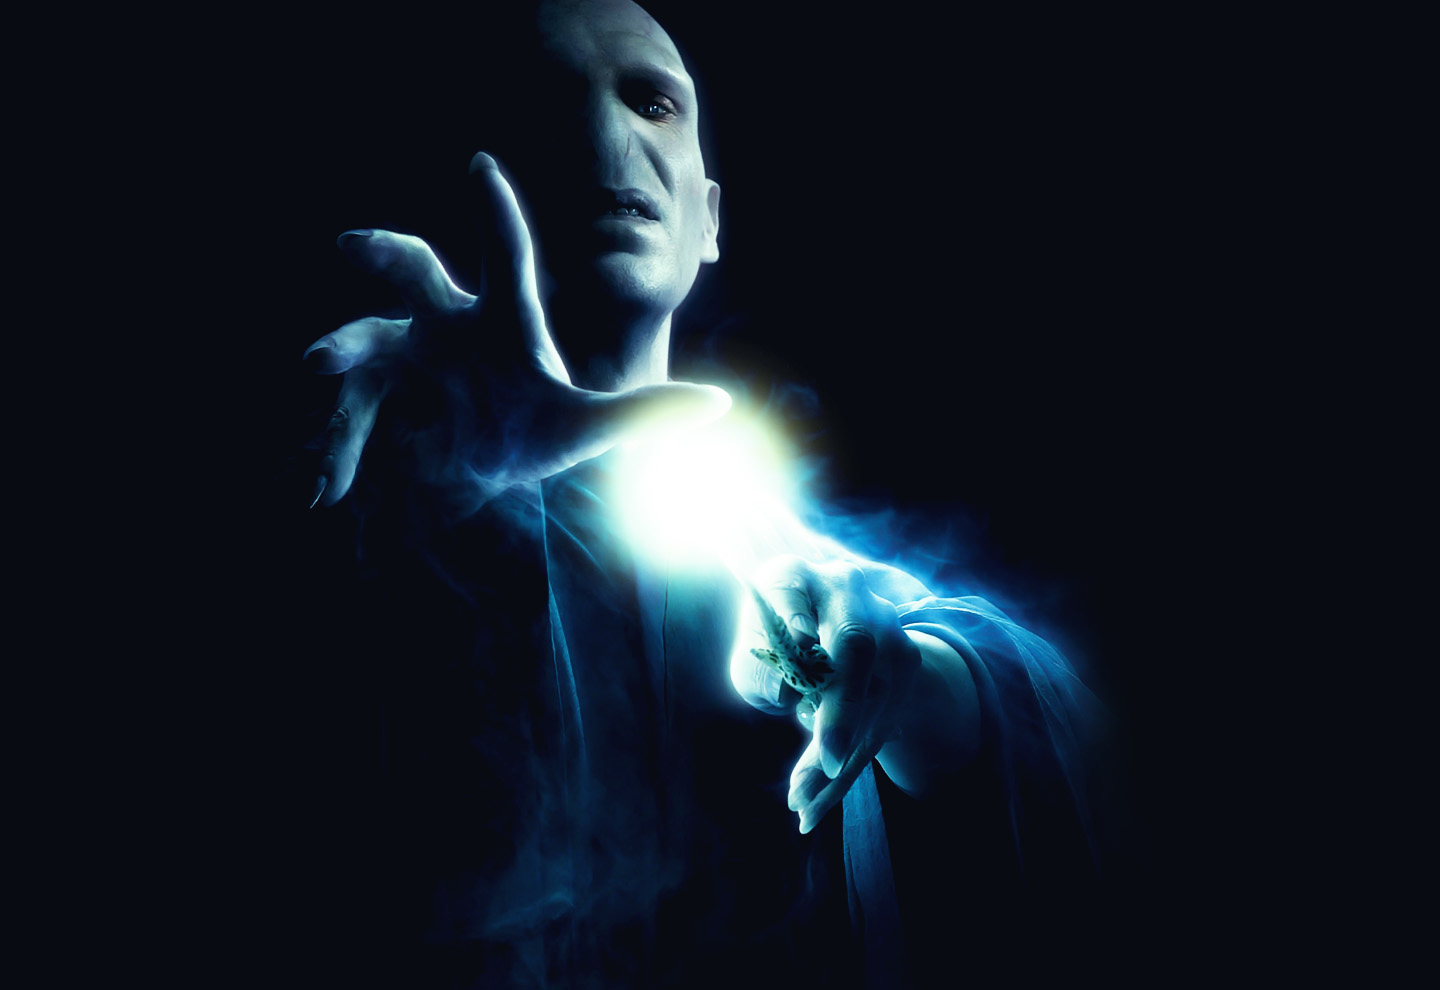 Lord Voldemort Wallpaper by Maxoooow on